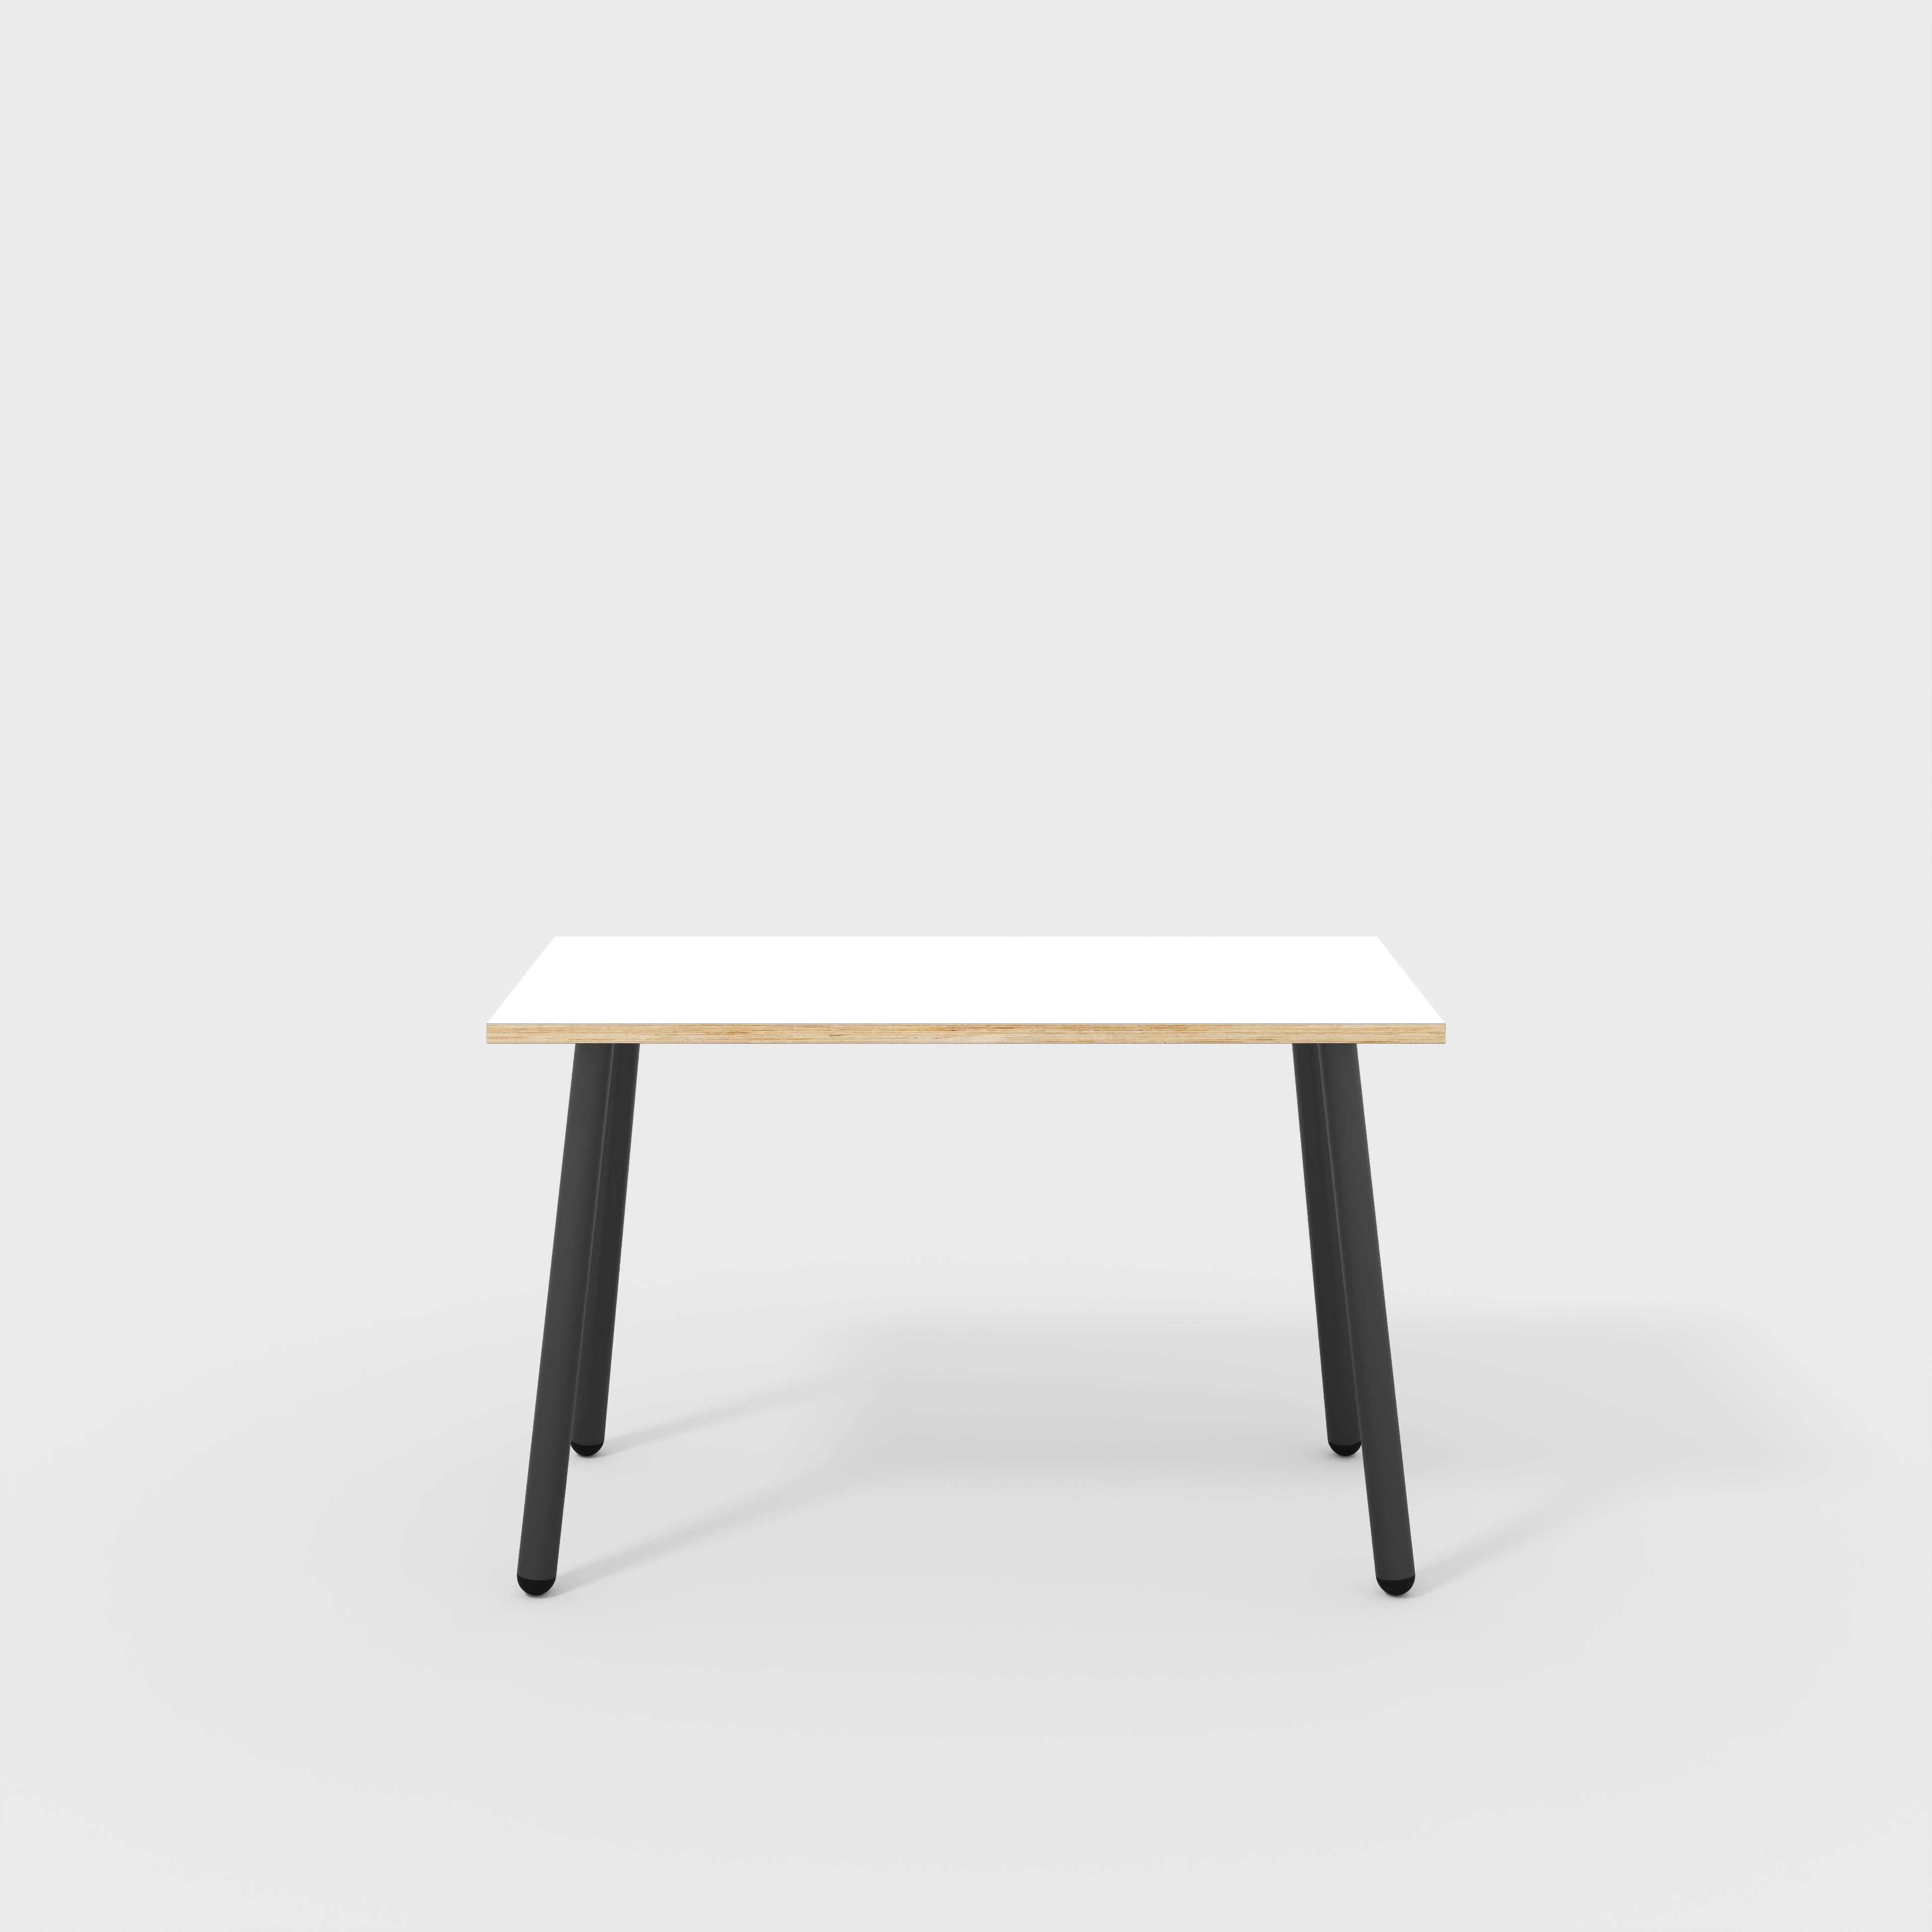 Desk with Black Round Single Pin Legs - Formica White - 1200(w) x 600(d) x 735(h)